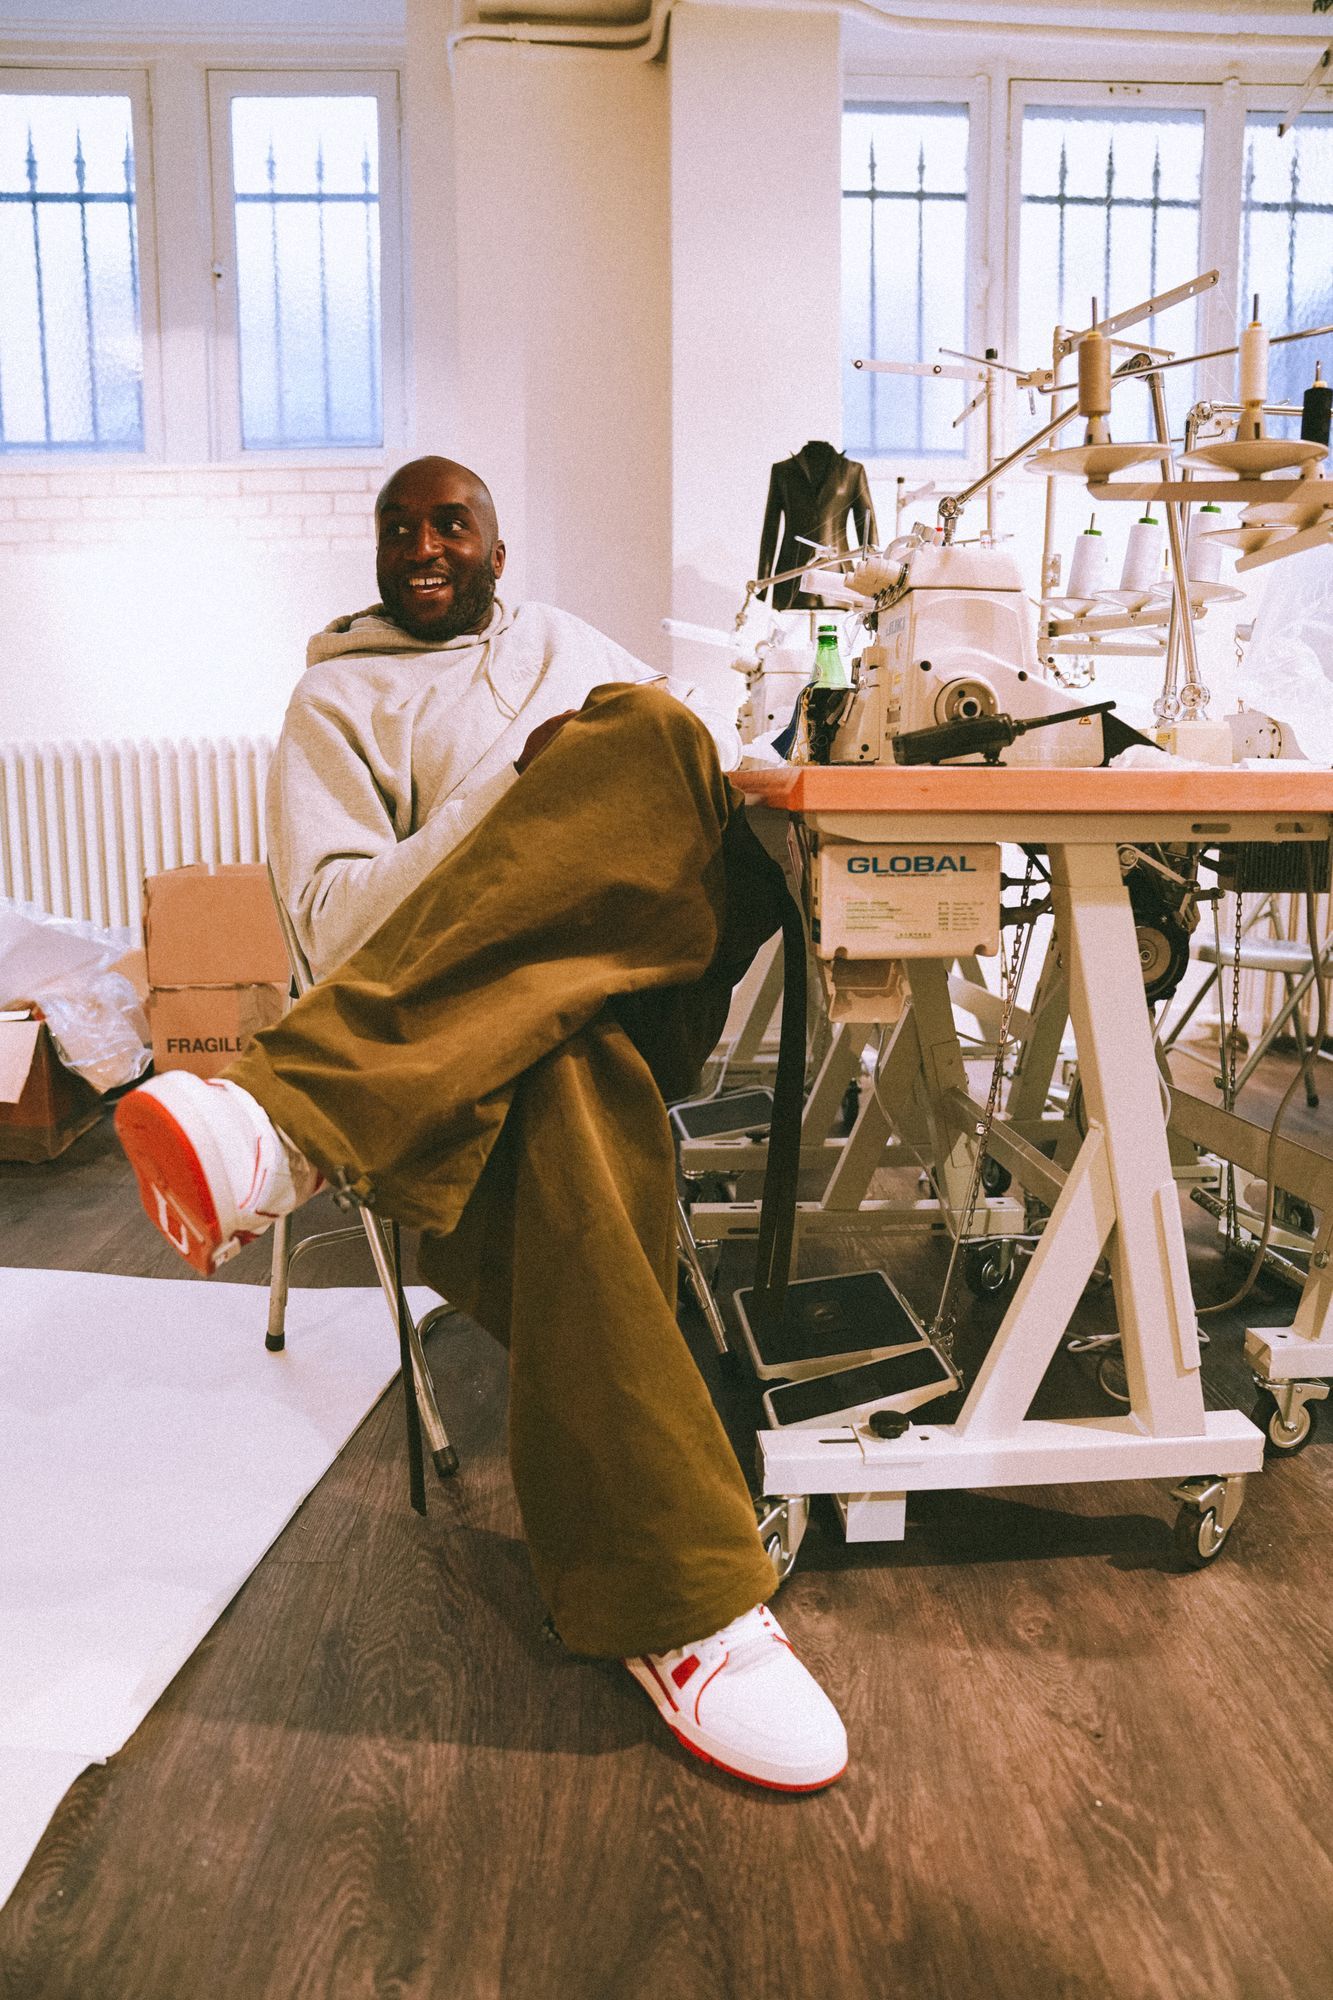 Things to do in New York, Brooklyn Museum Virgil Abloh “Figures of Sp